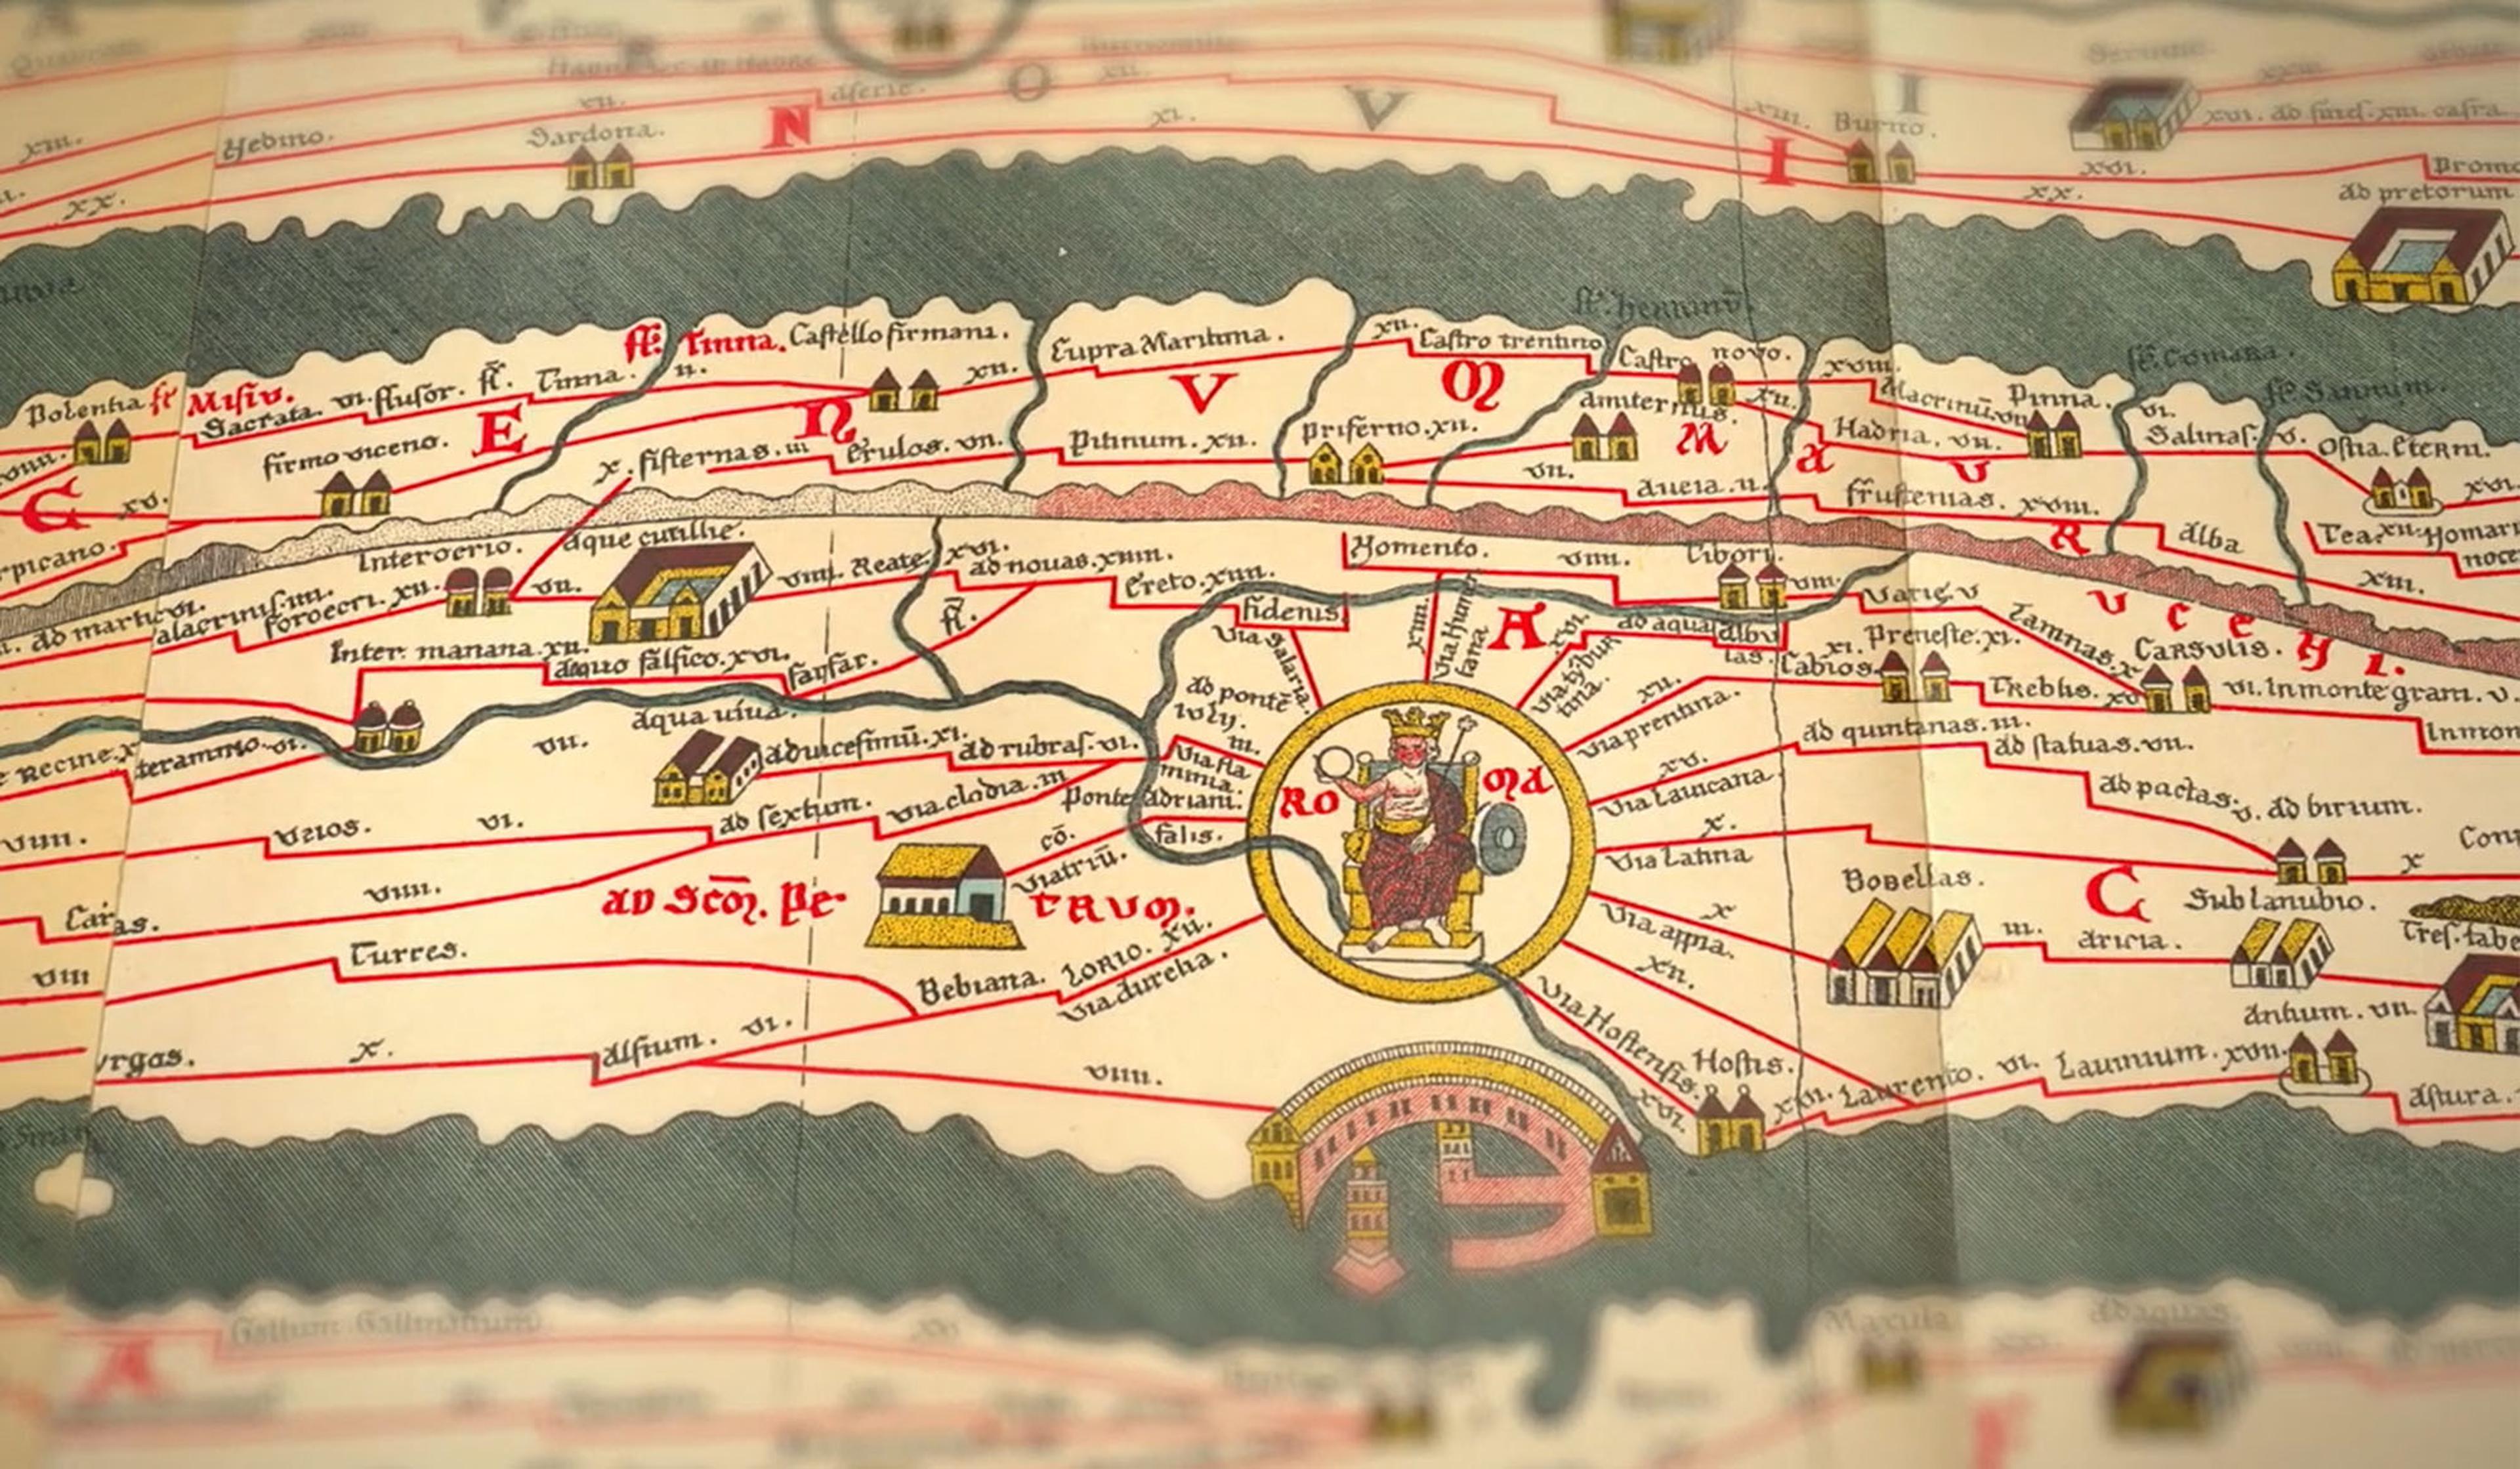 Ancient map with labelled roads, towns, and a crowned figure holding symbols inside a circular icon, illustrating an old cartography style.